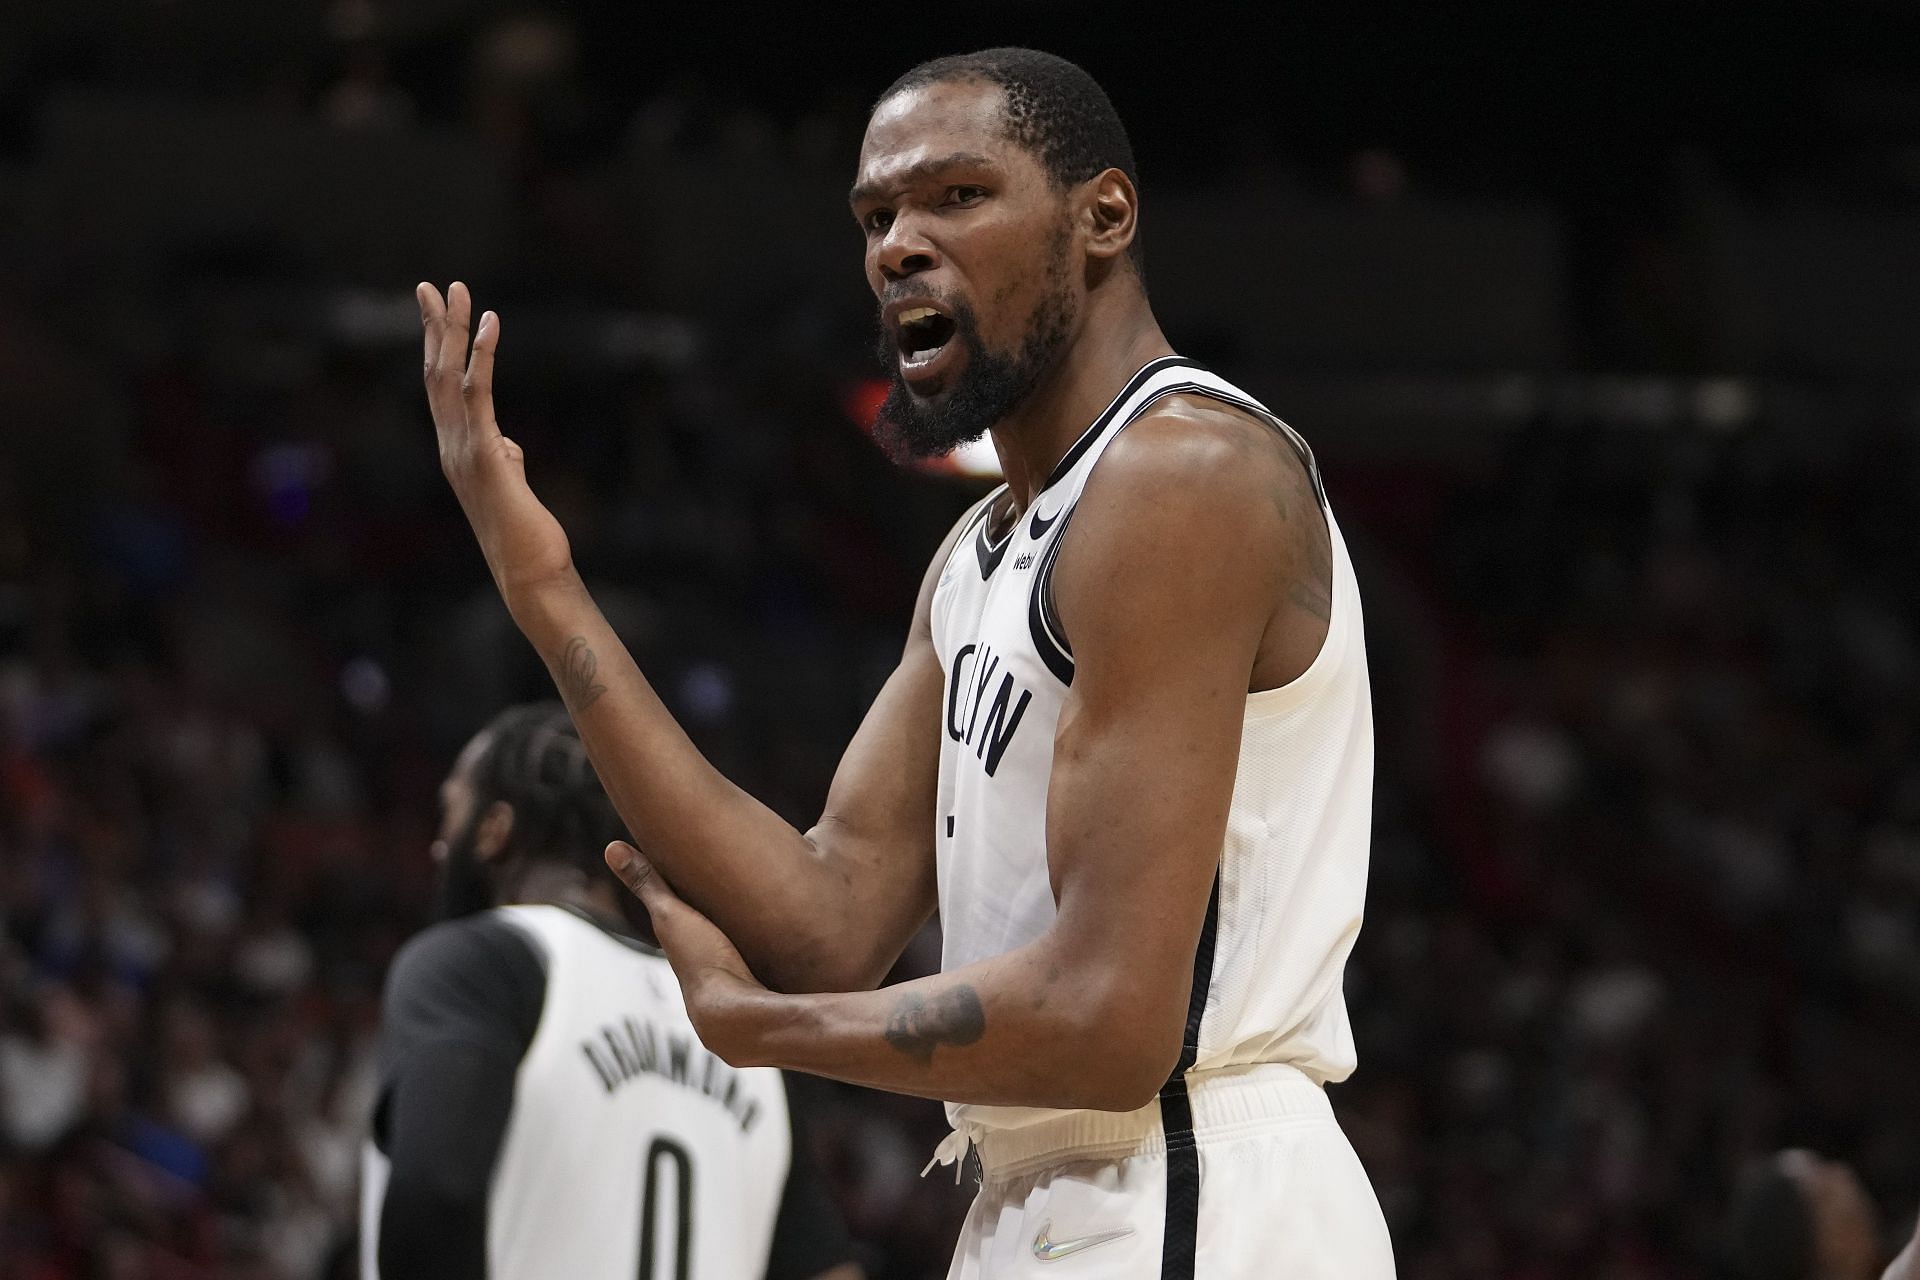 Brooklyn Nets star Kevin Durant in action during a game